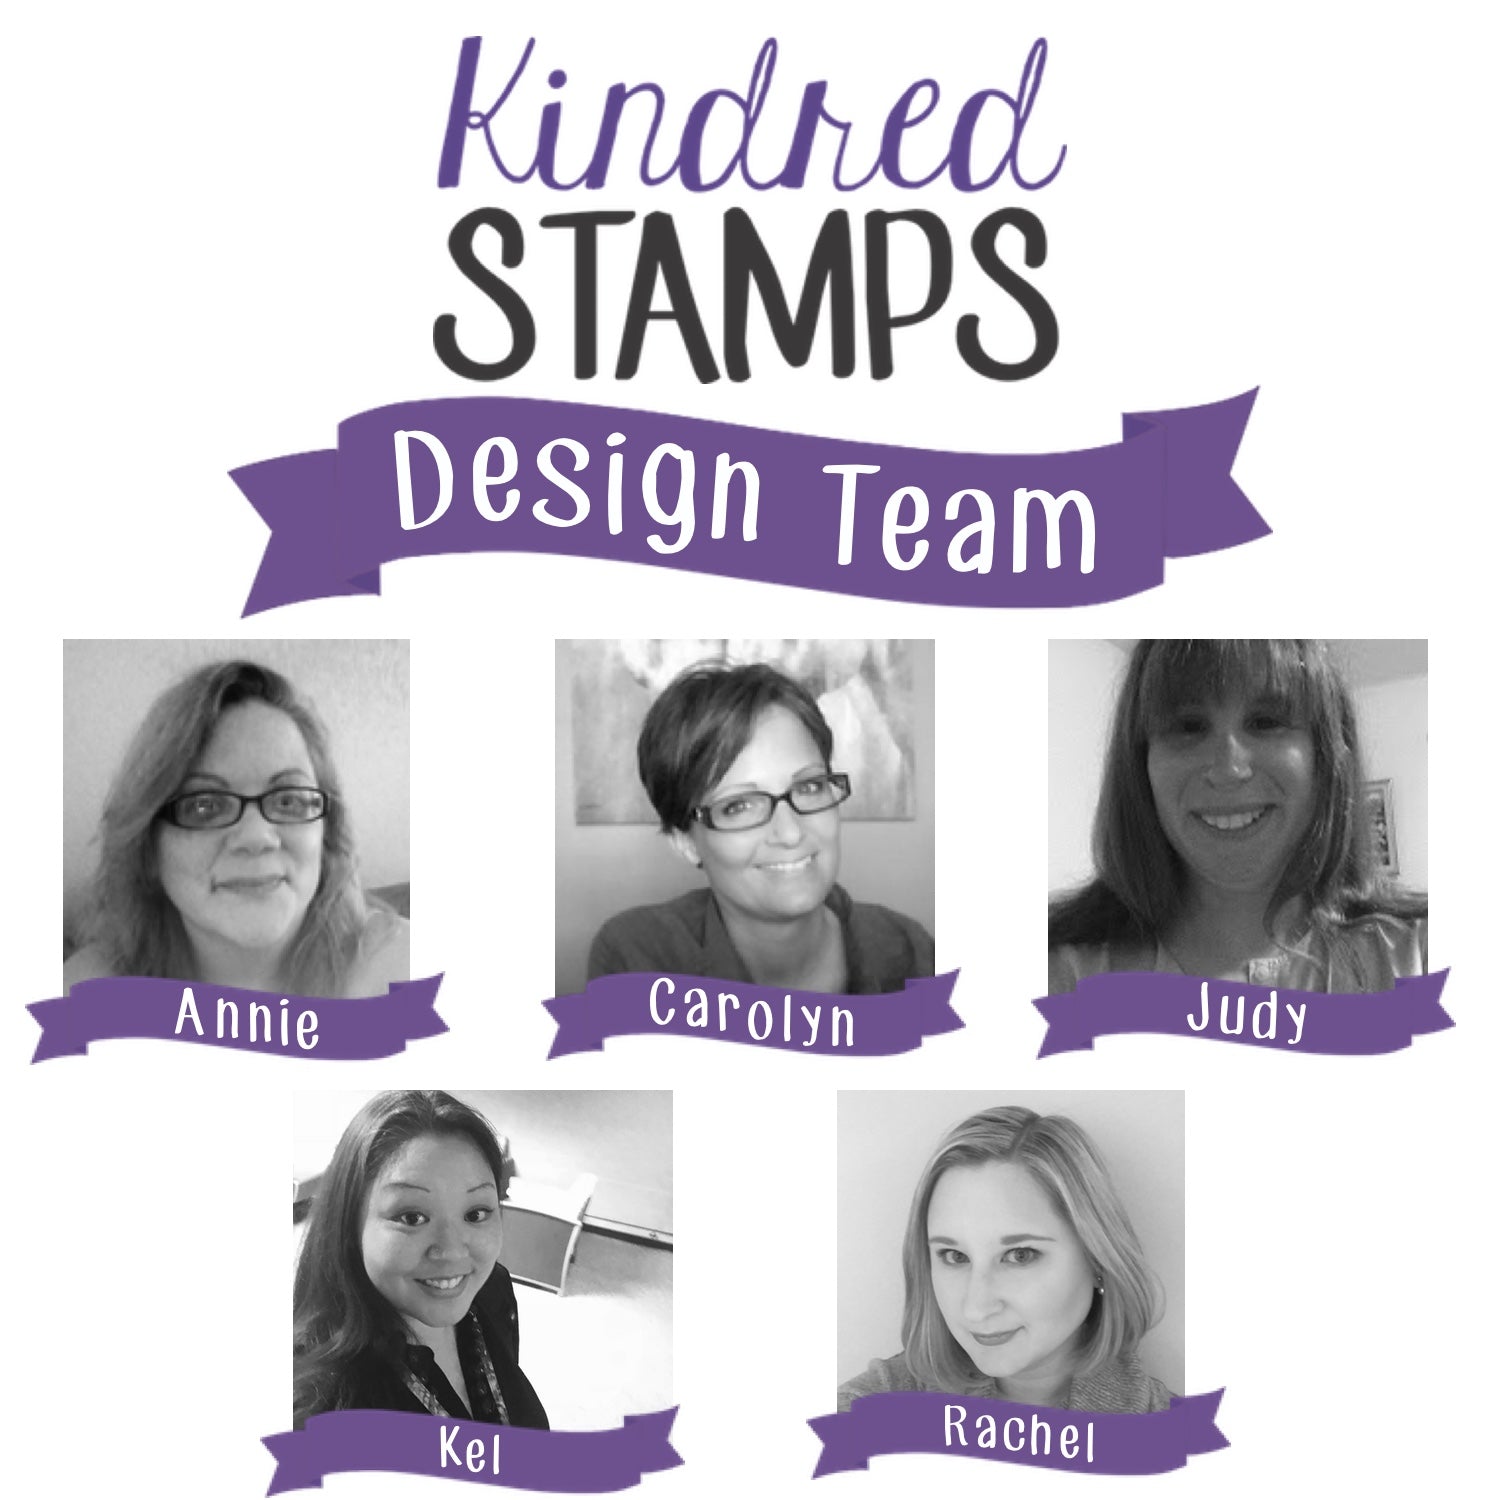 Introducing the newest Kindred Stamps Design Team!